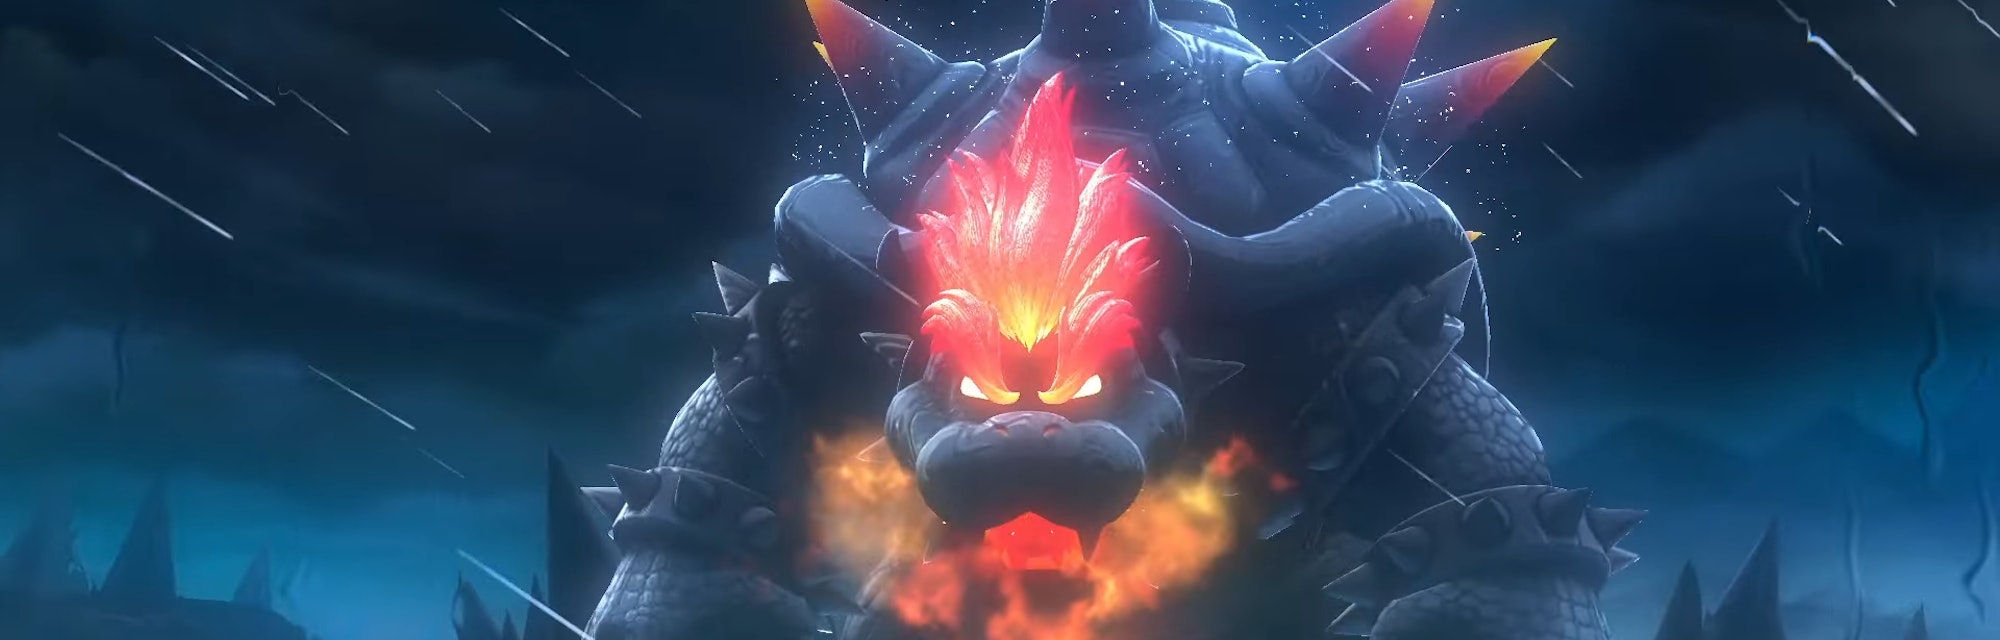 Super Mario 3d World Bowser S Fury Release Date Trailer And New Level